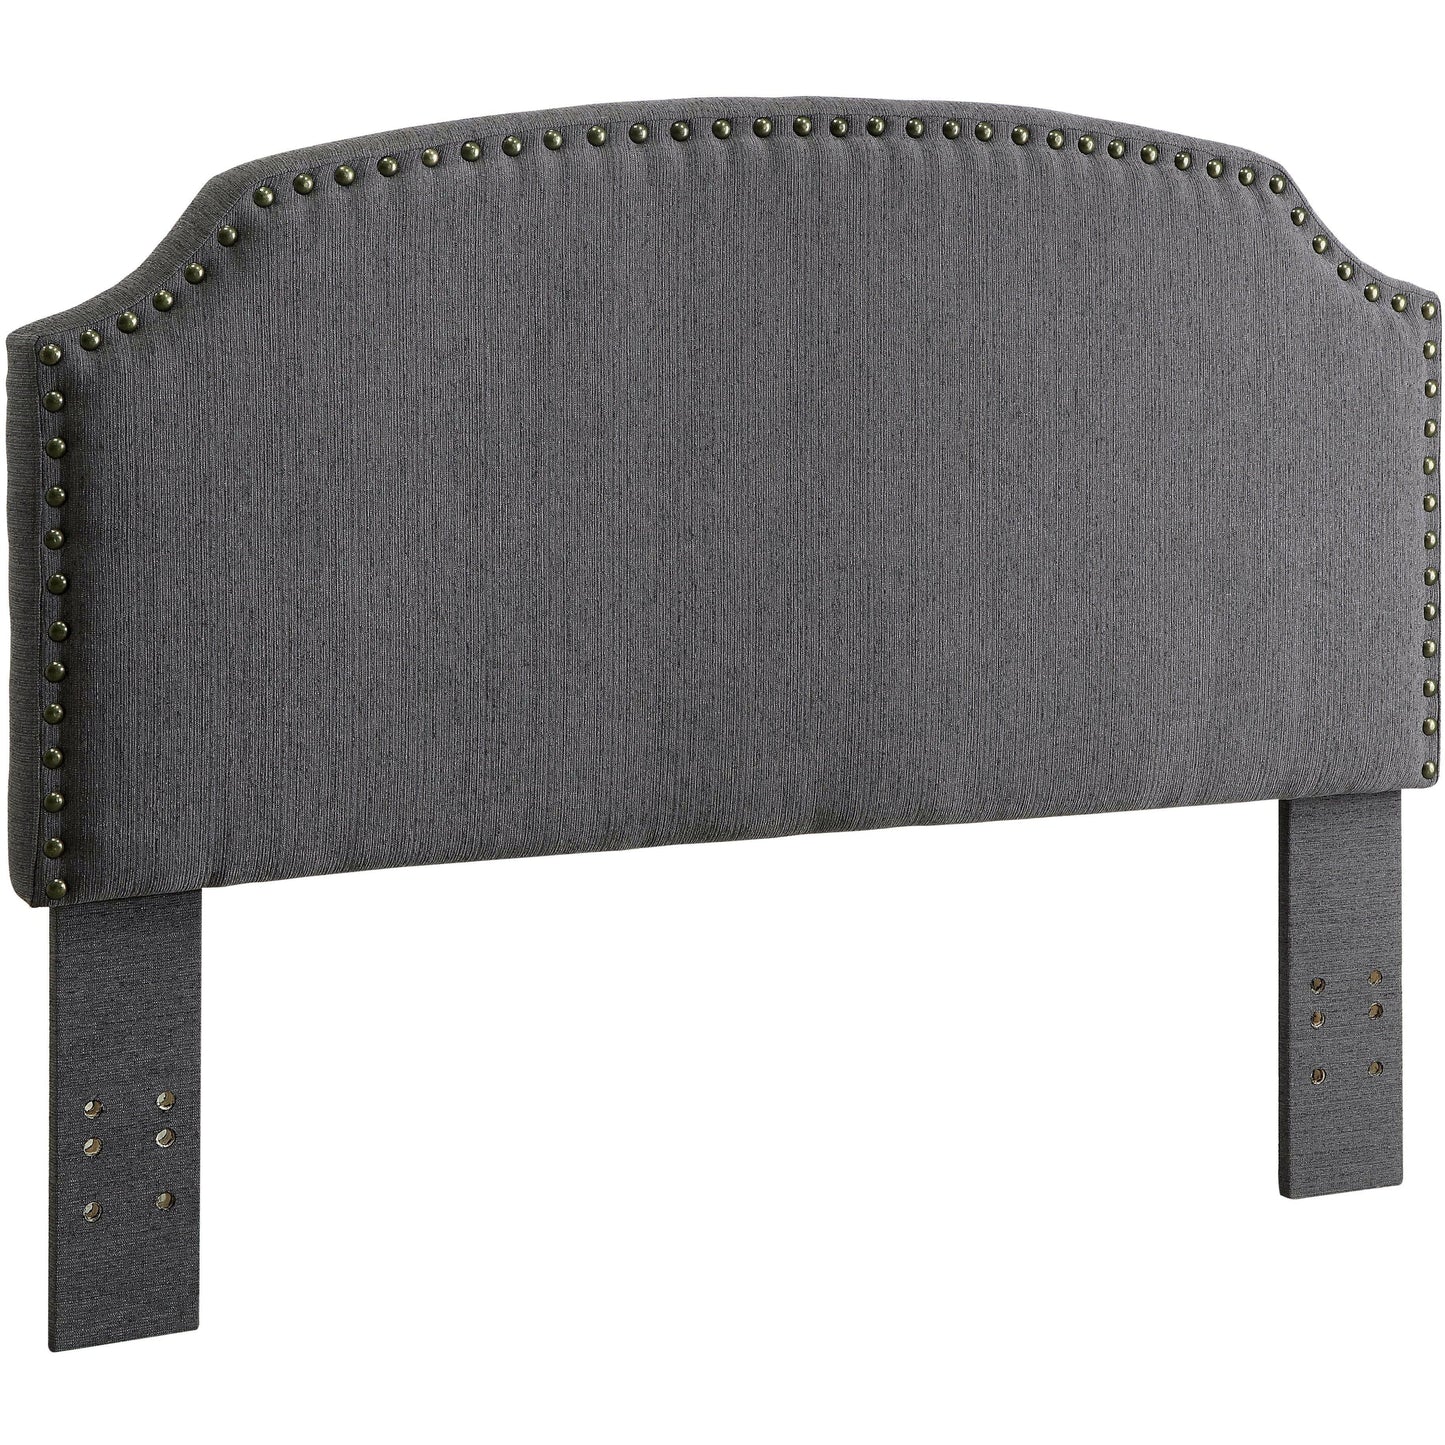 Furniture of America Afy Contemporary Camelback Full/Queen Headboard- DISCONTINUED Gray / Full/Queen IDF-7880GY-HB-FQ